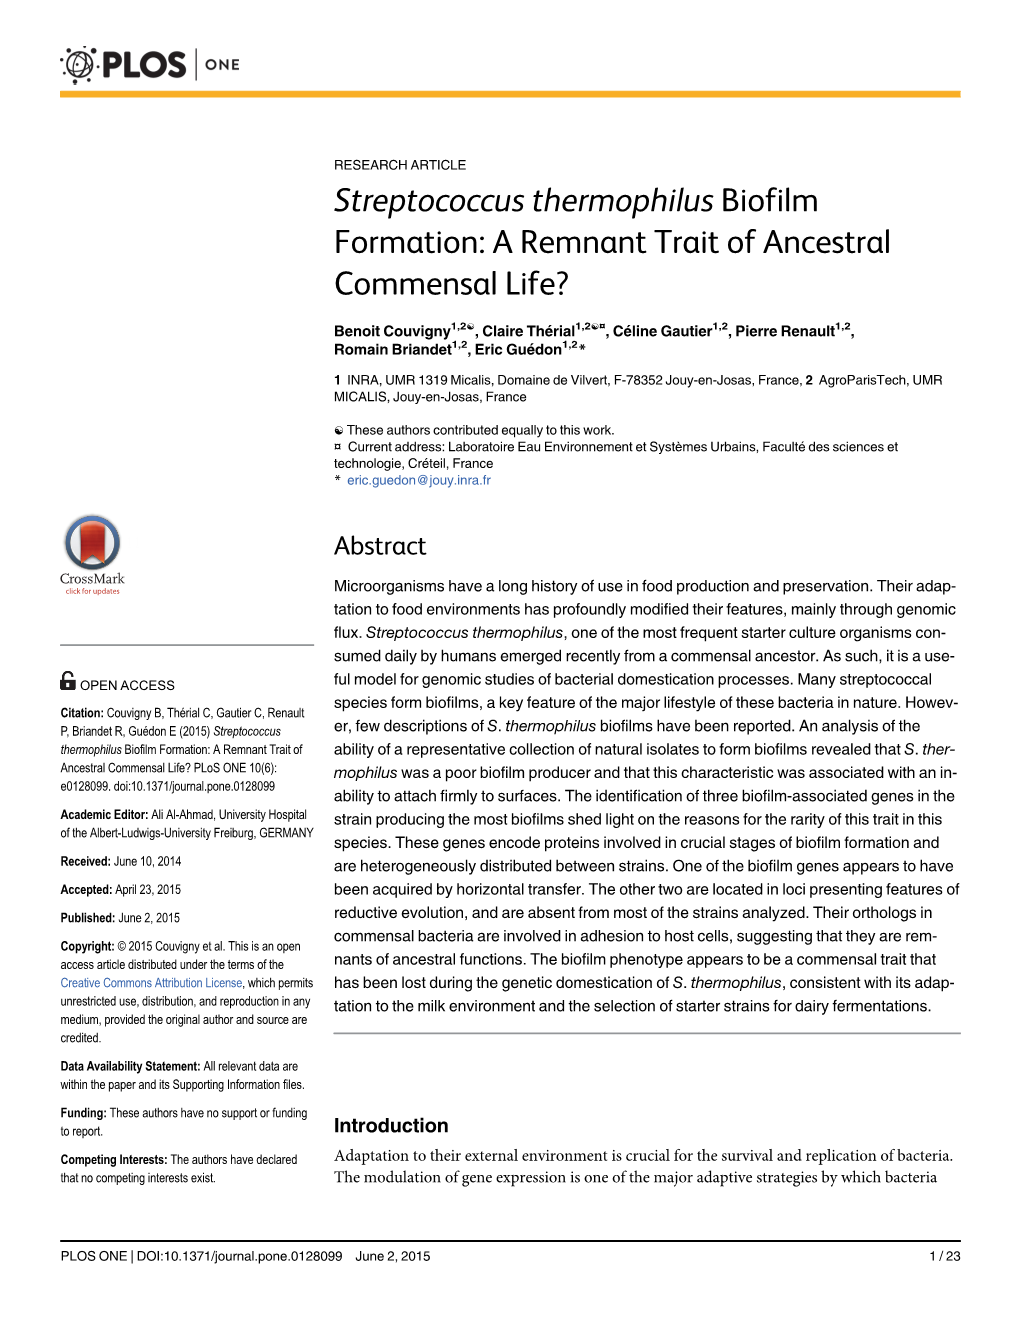 Streptococcus Thermophilus Biofilm Formation: a Remnant Trait of Ancestral Commensal Life?